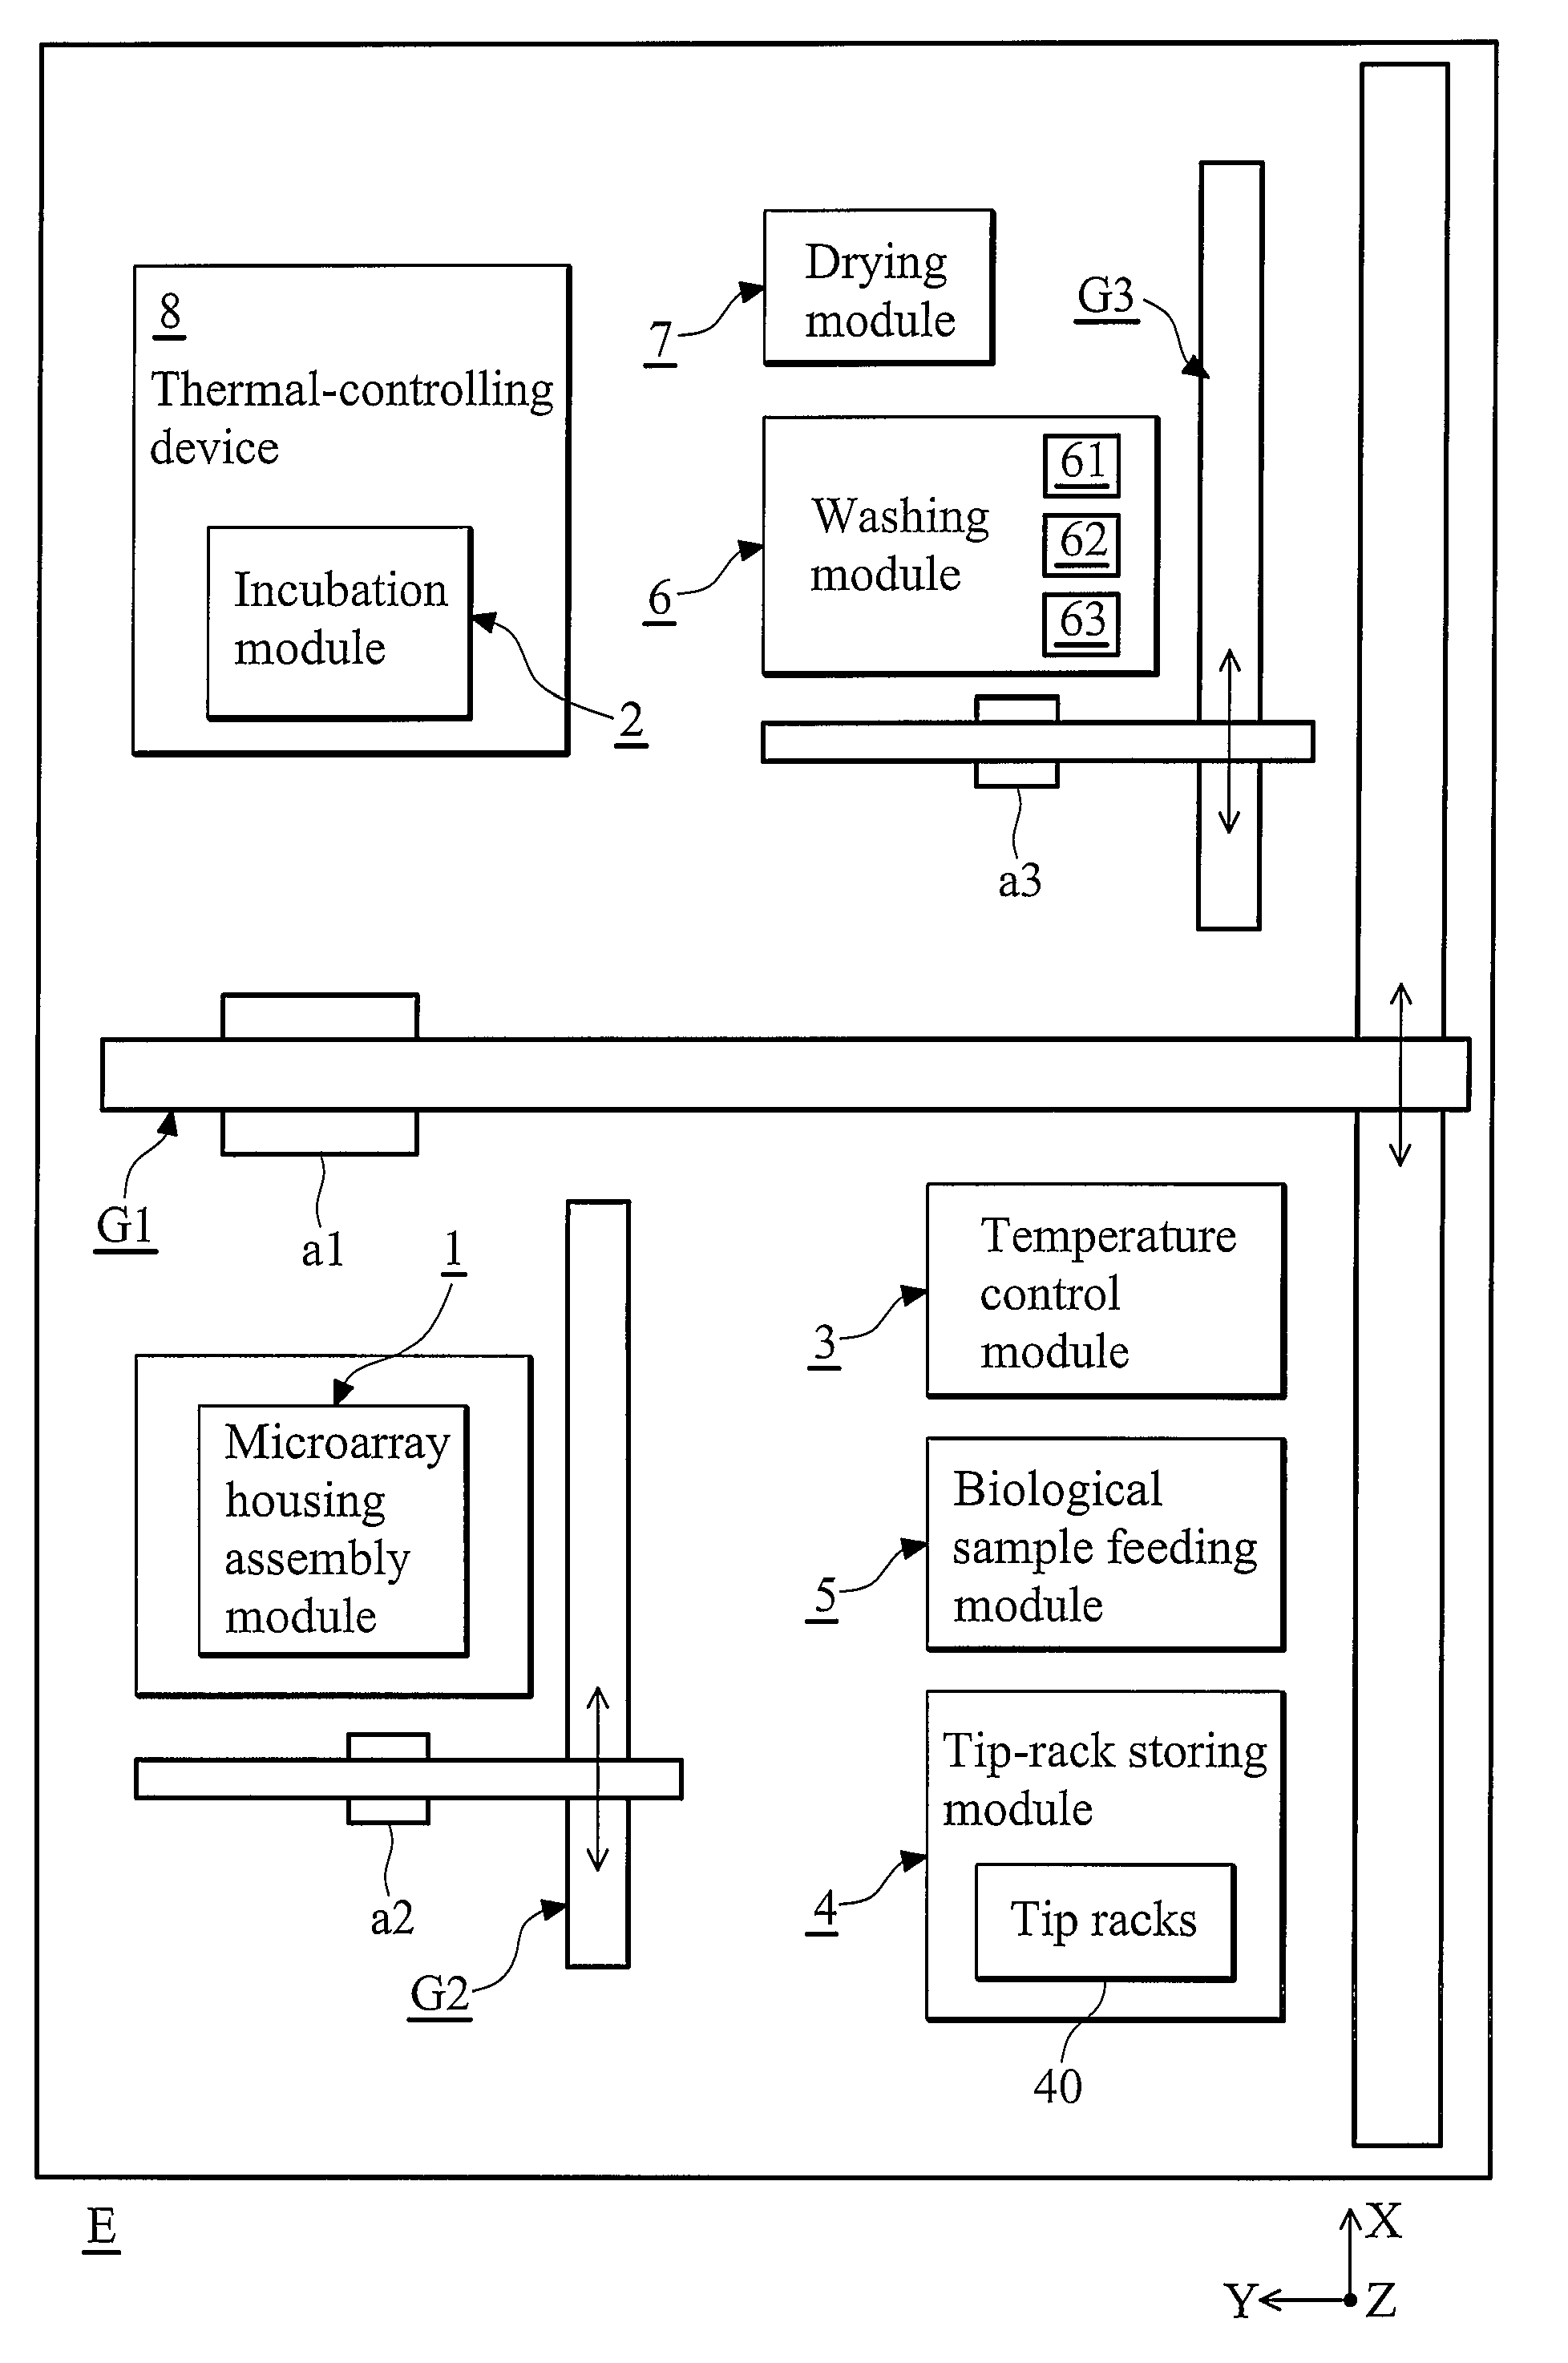 Fully automated microarray processing system